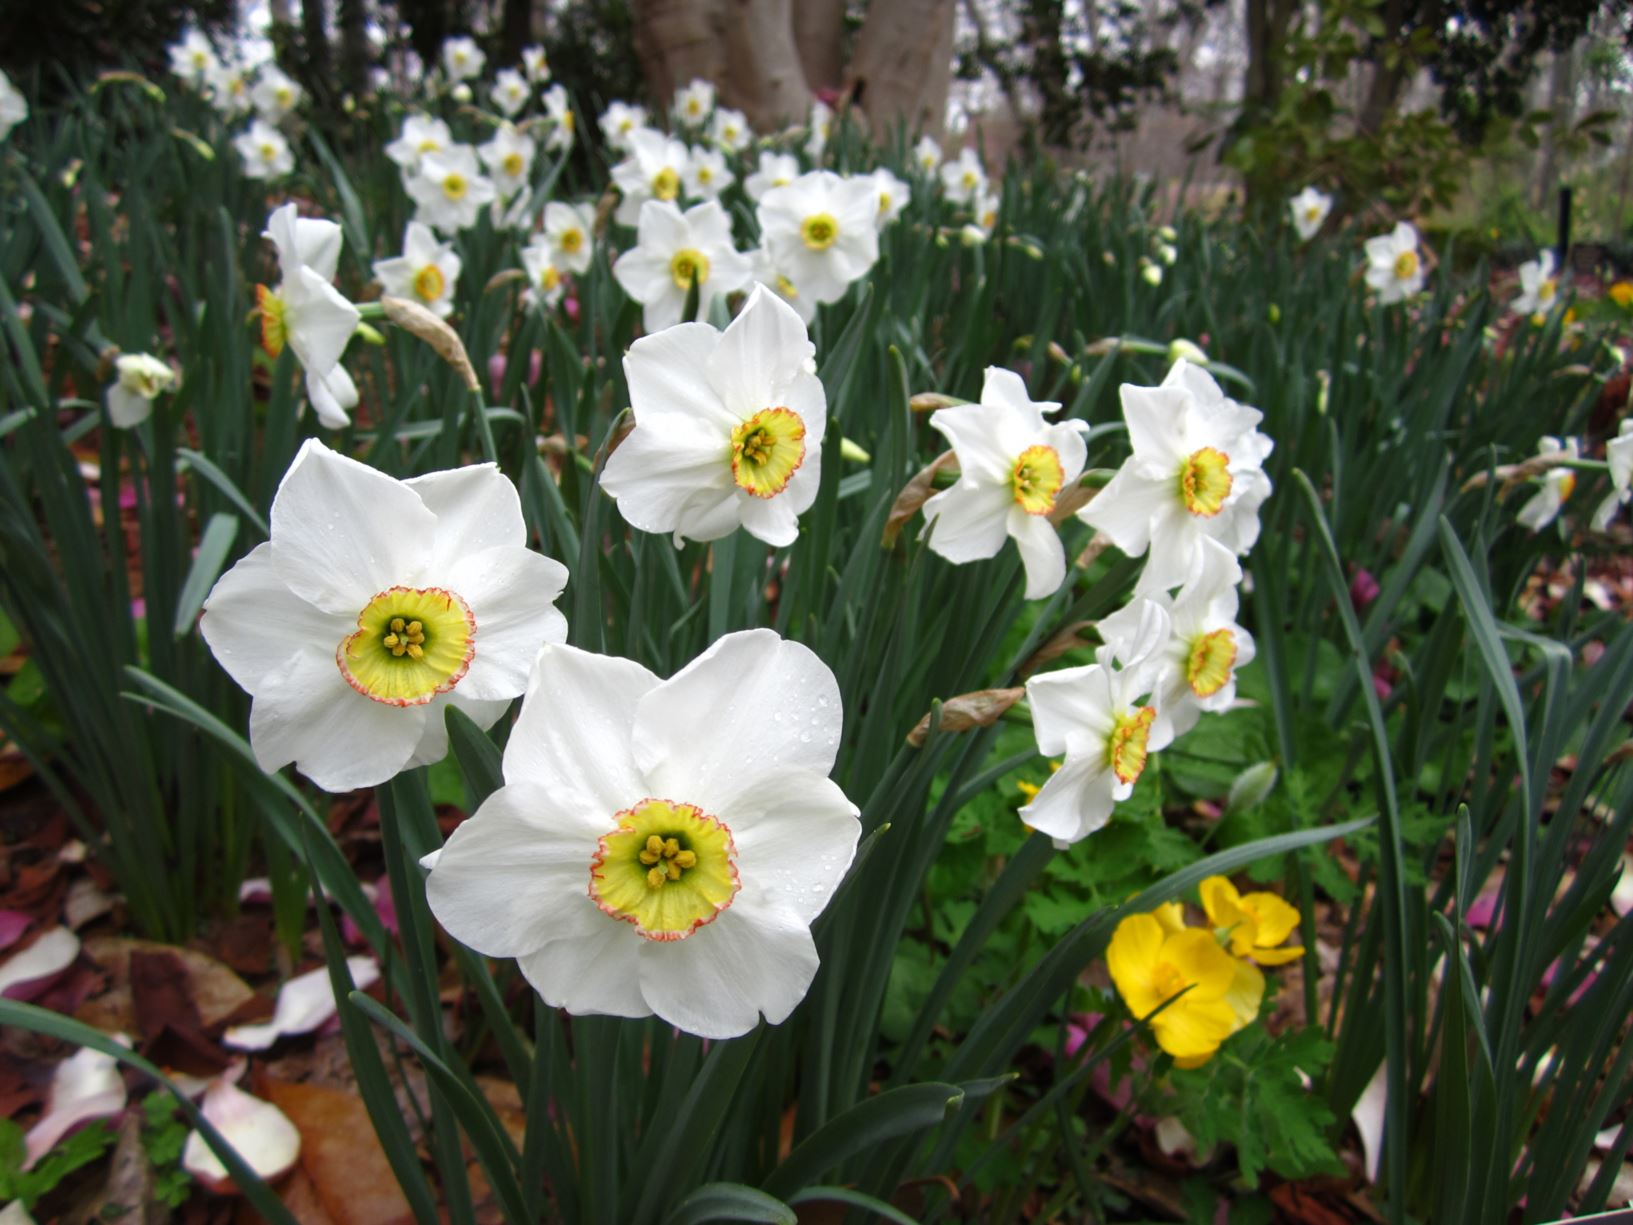 Narcissus 'Milan' - poeticus daffodil